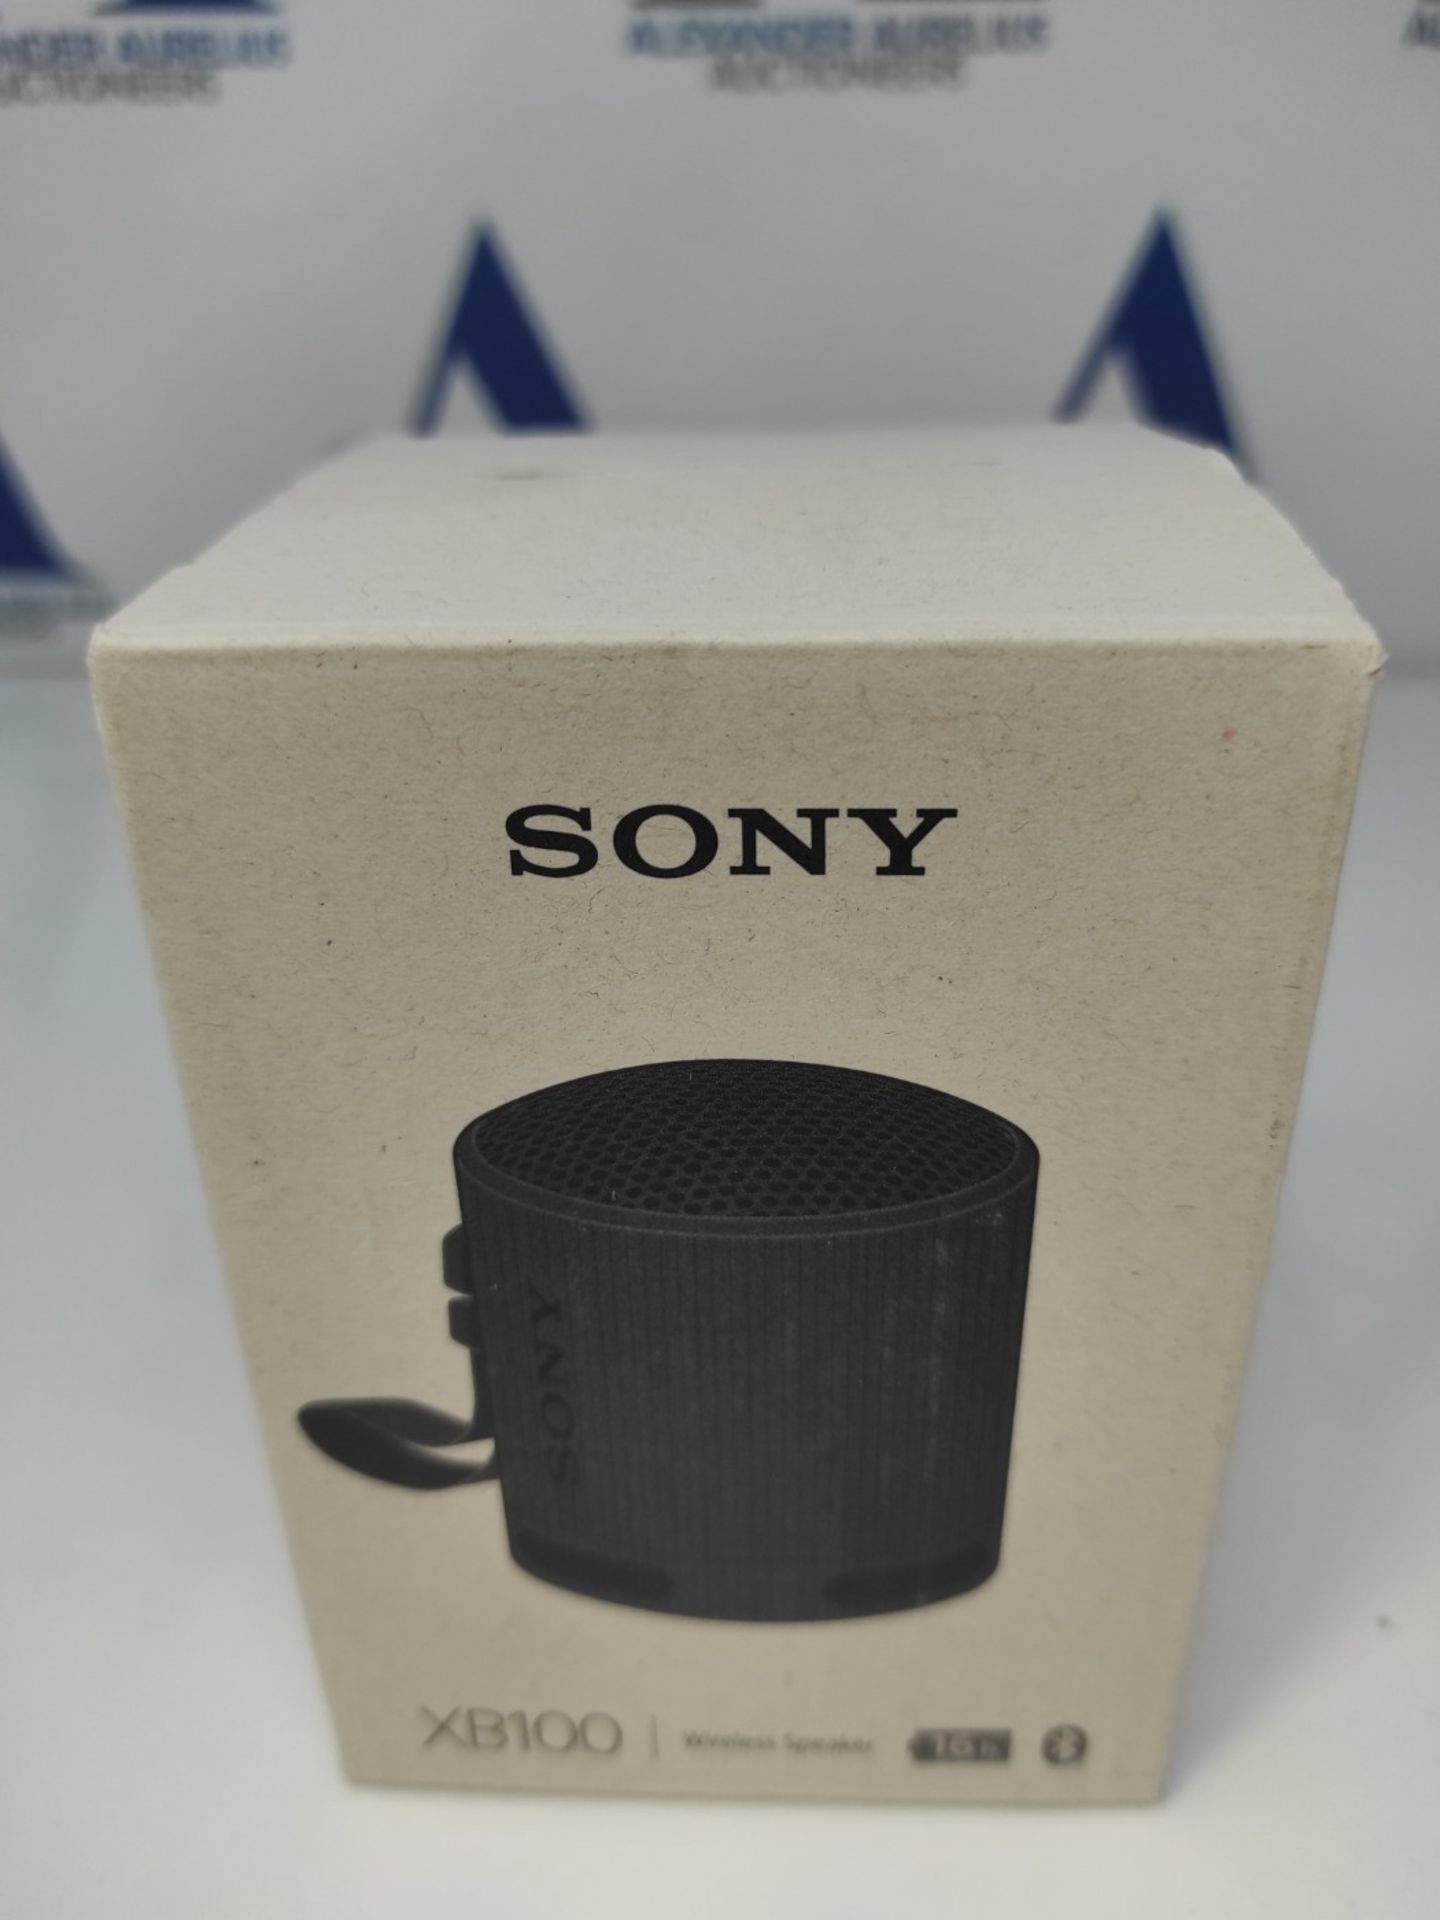 Sony SRS-XB100 - Wireless Bluetooth Speaker, Portable, Lightweight, Compact, Durable, - Image 5 of 6